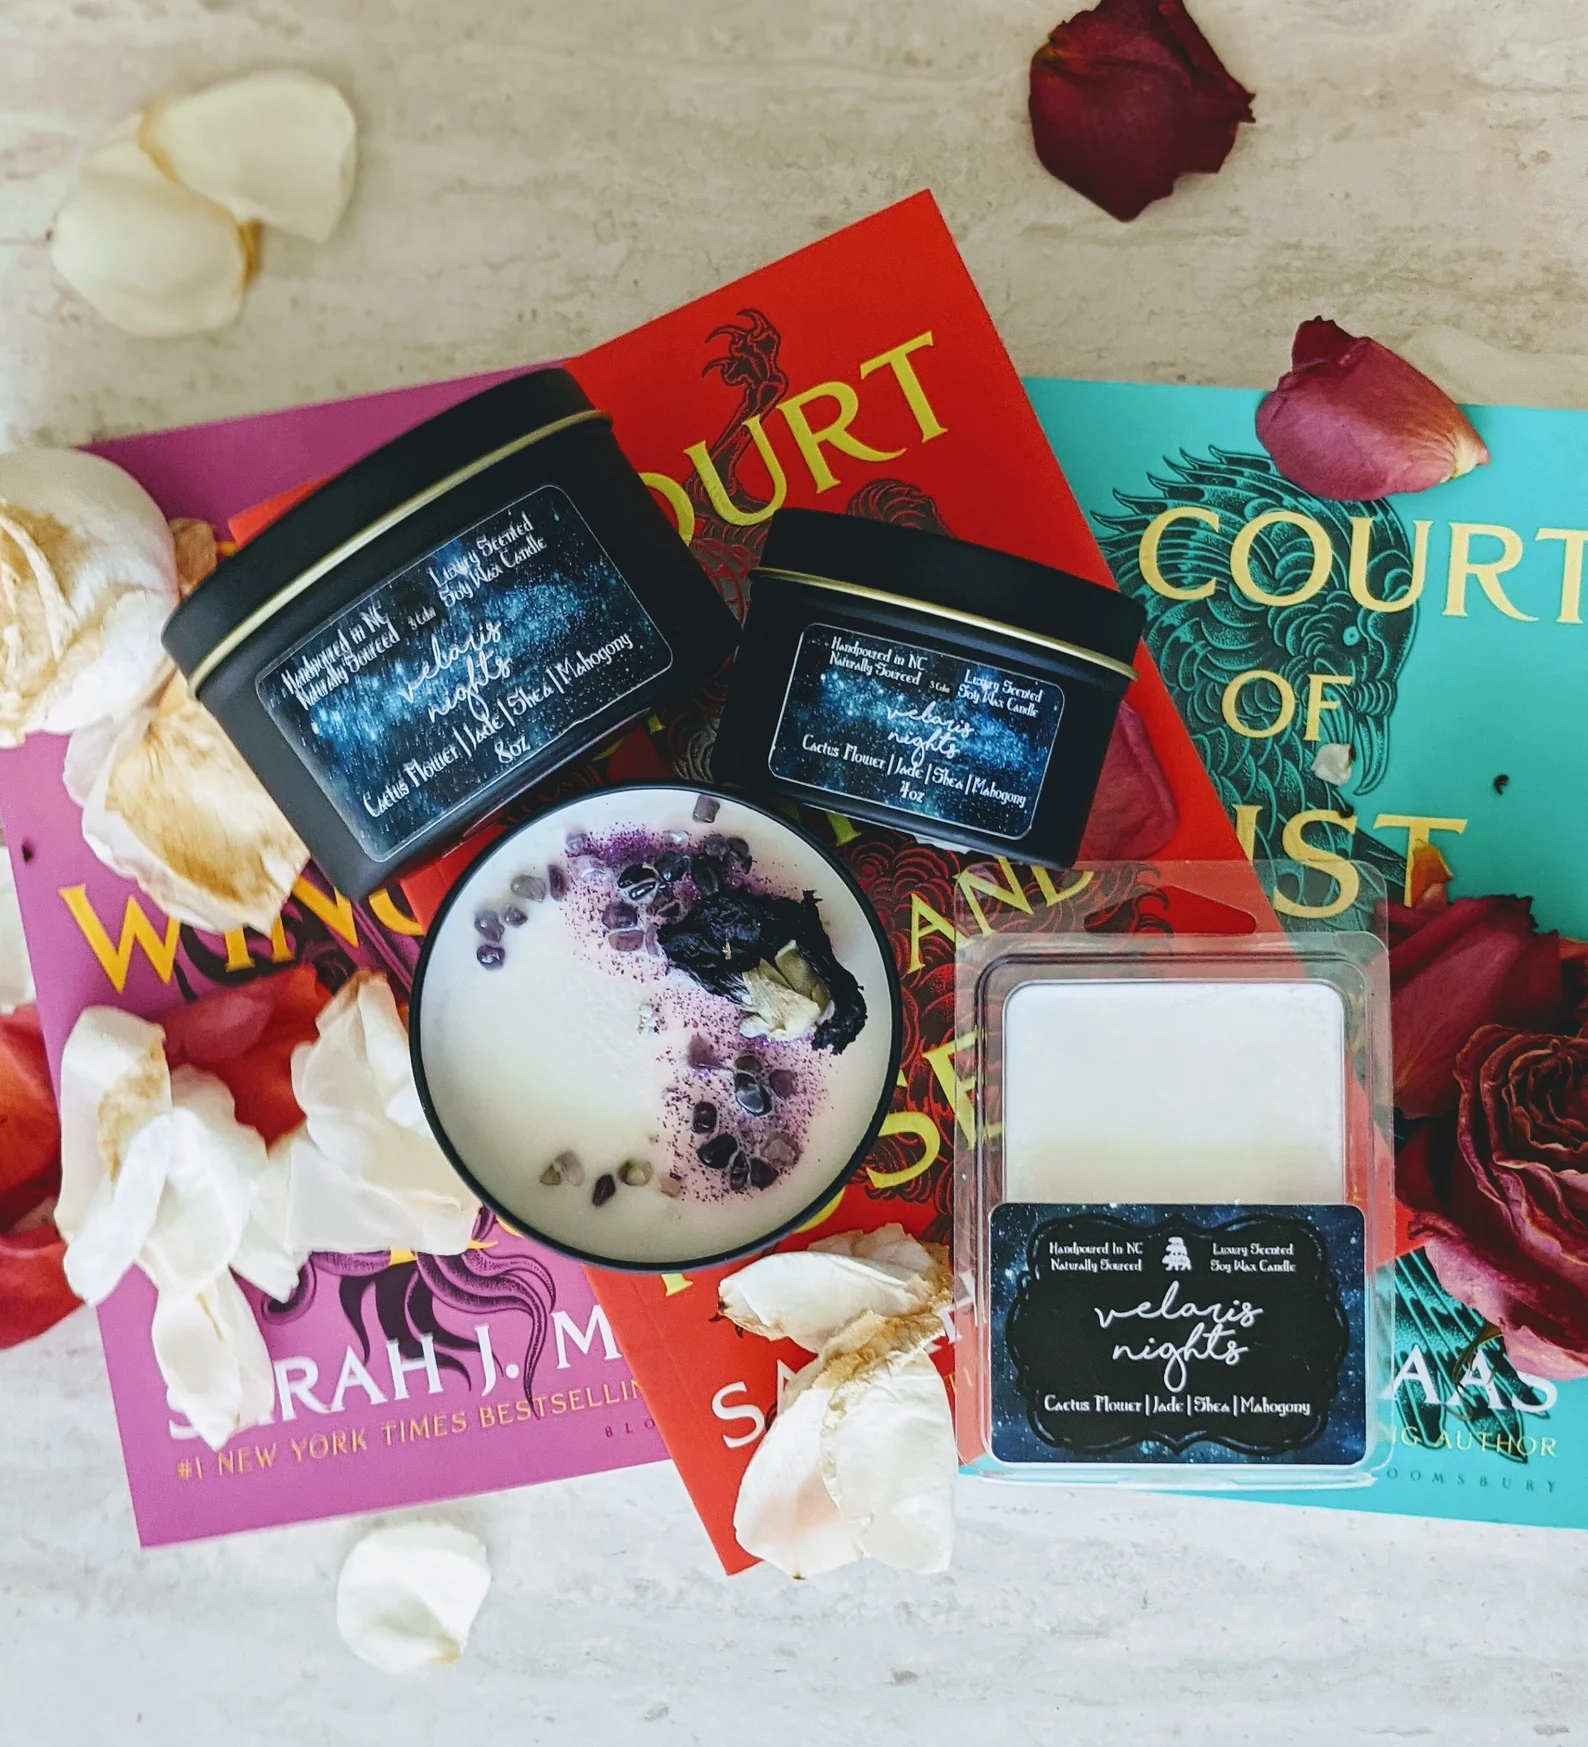 A photo of three candles in black metal containers and a wax block that read Velaris nights cactus flowers, jade, shea, and mahogany. The candles are staged on top of the three books in the court of thorns and roses series and rose petals.